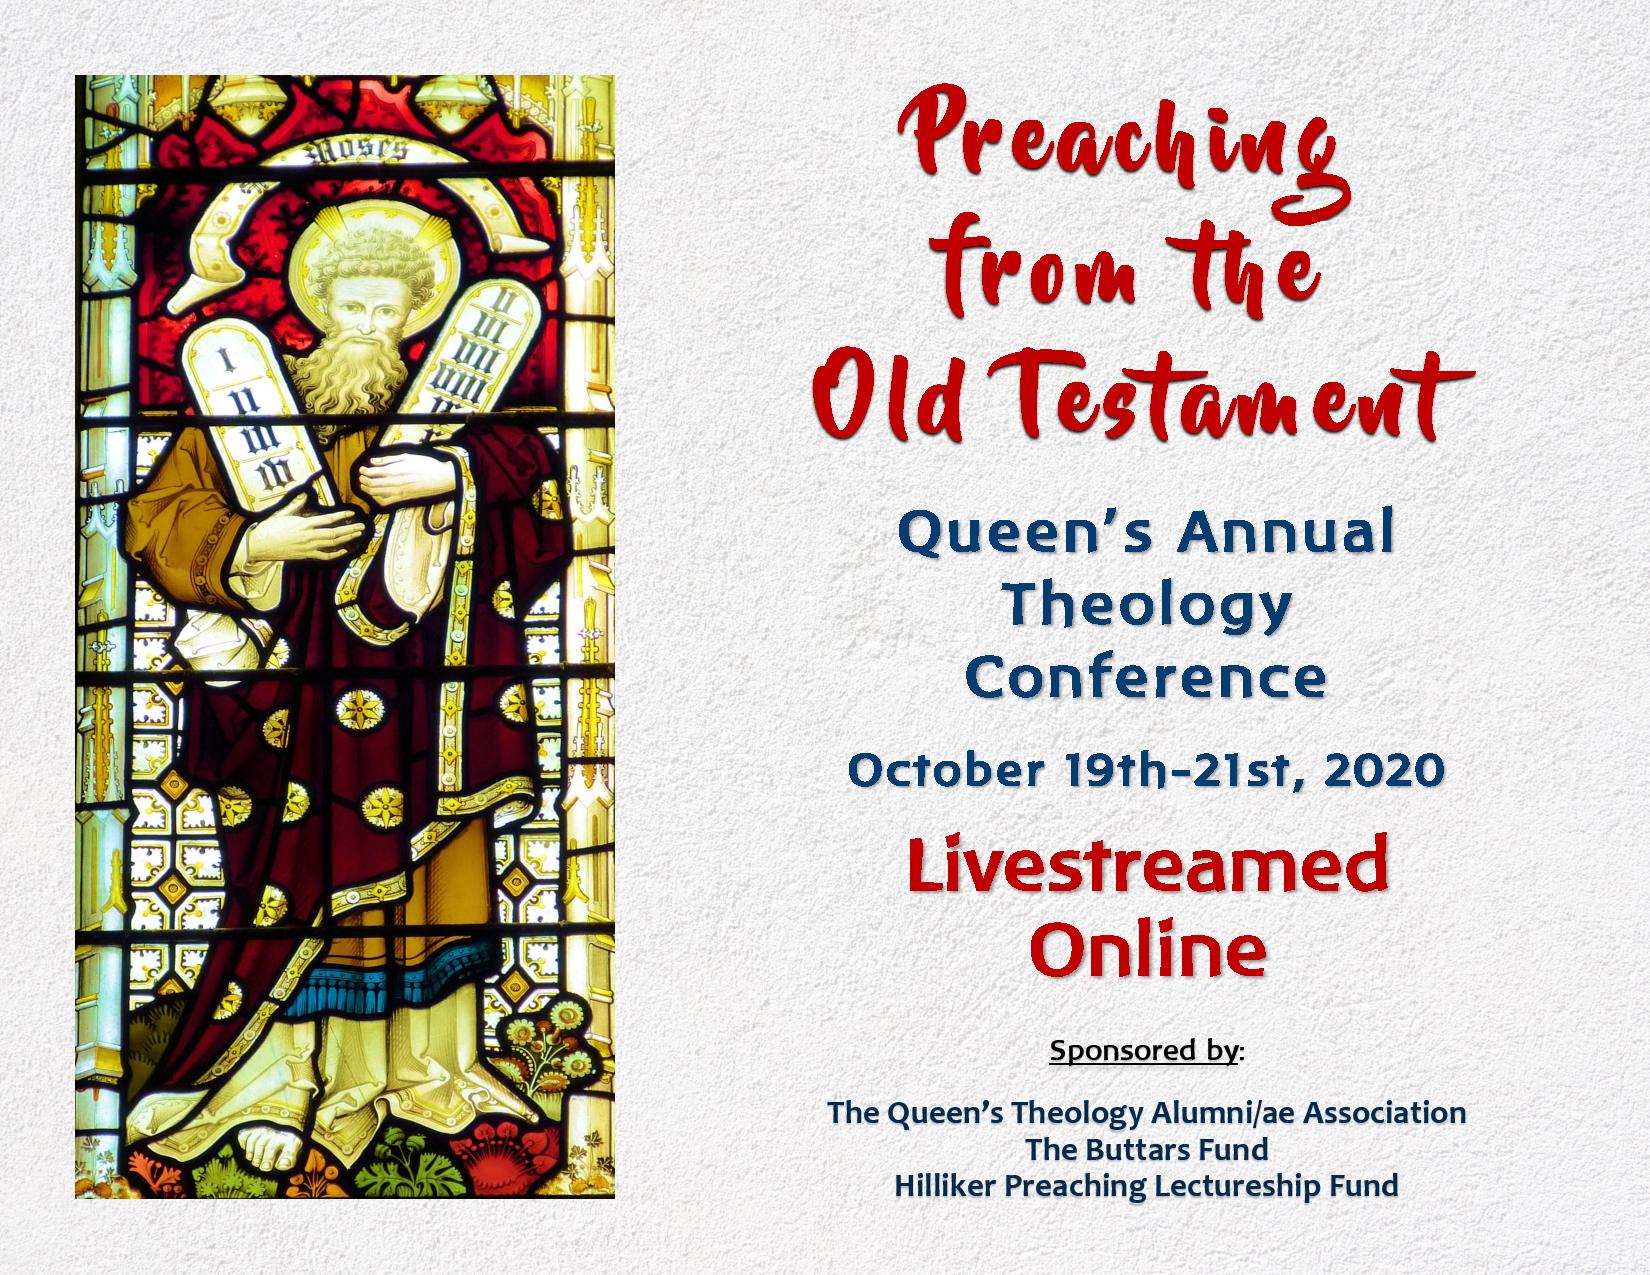 Brochure cover for Queen's theology conference